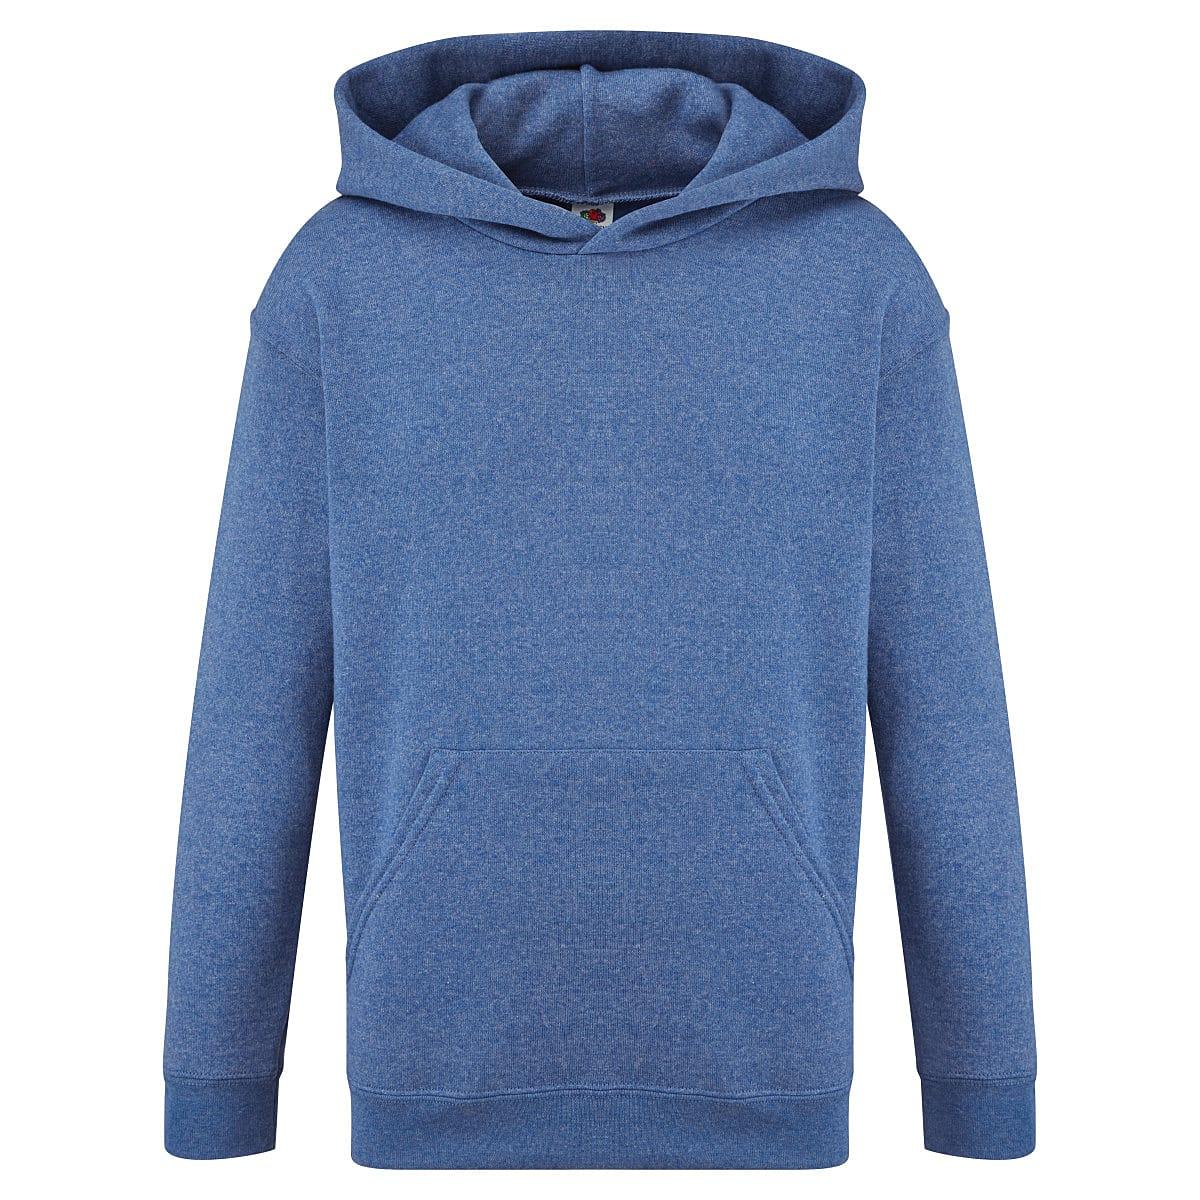 Fruit Of The Loom Childrens Hoodie in Retro Heather Royal (Product Code: 62043)